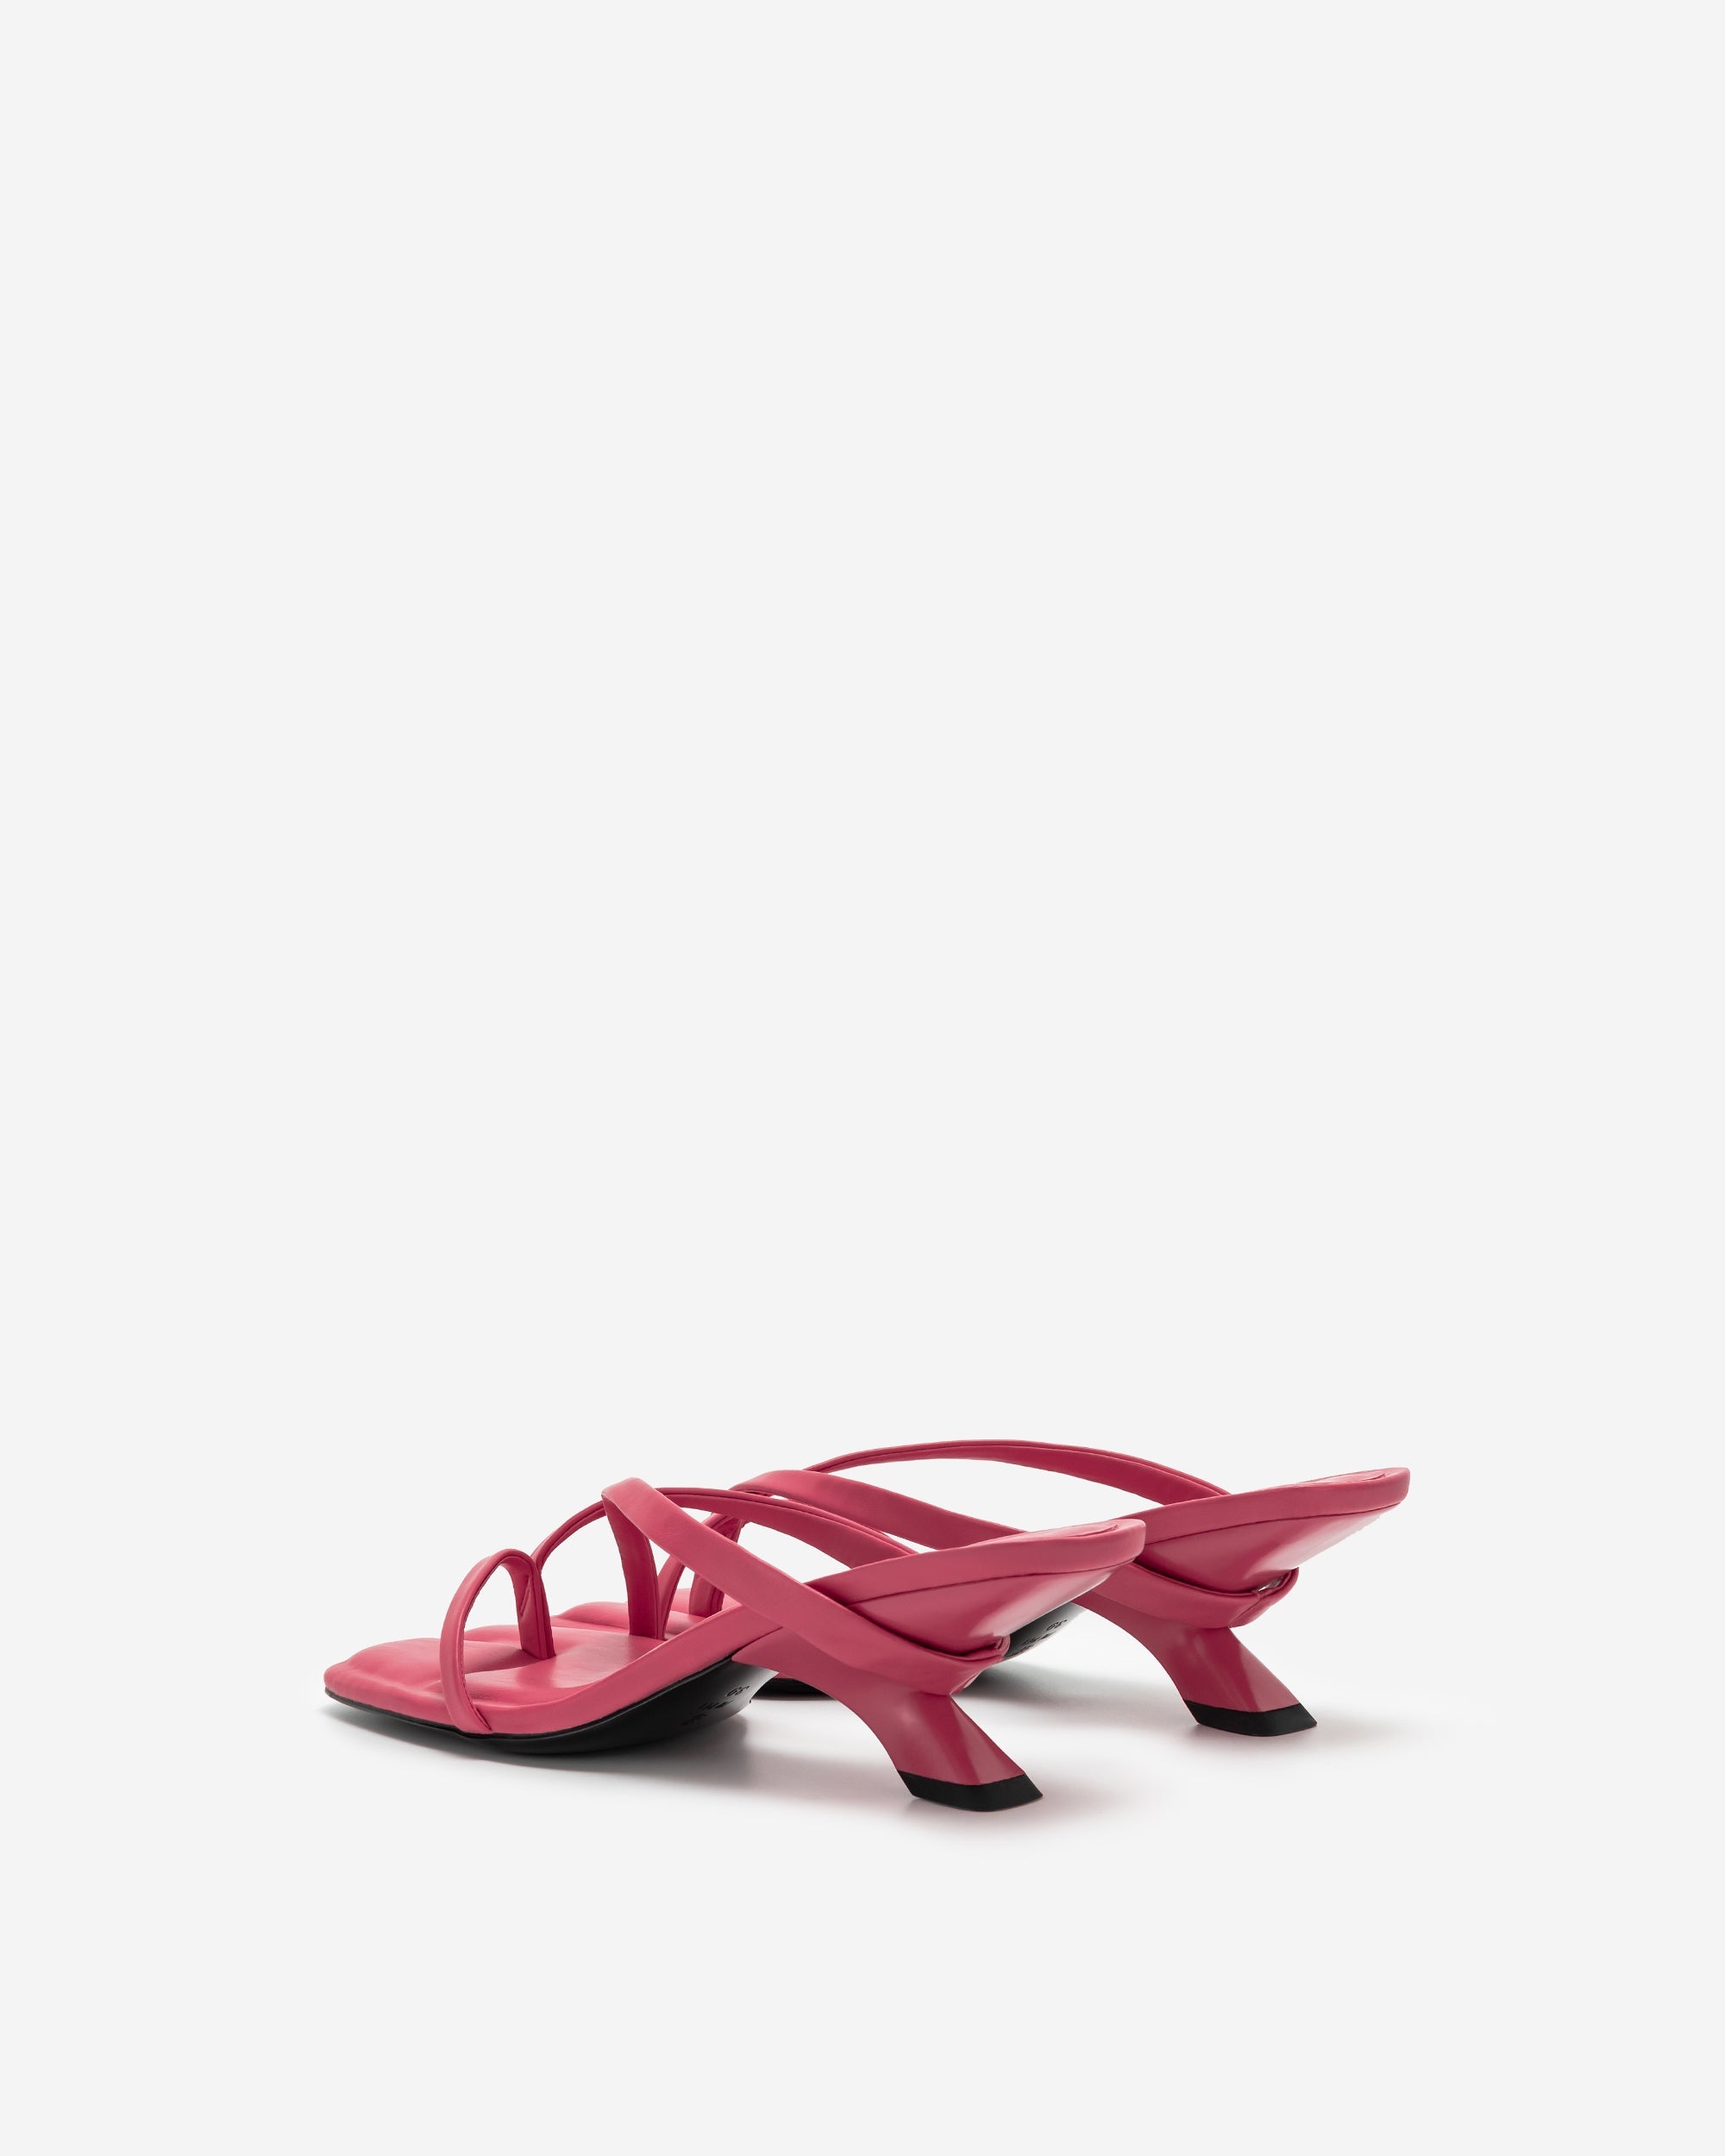 Maeve Strappy Mule - Rose Red